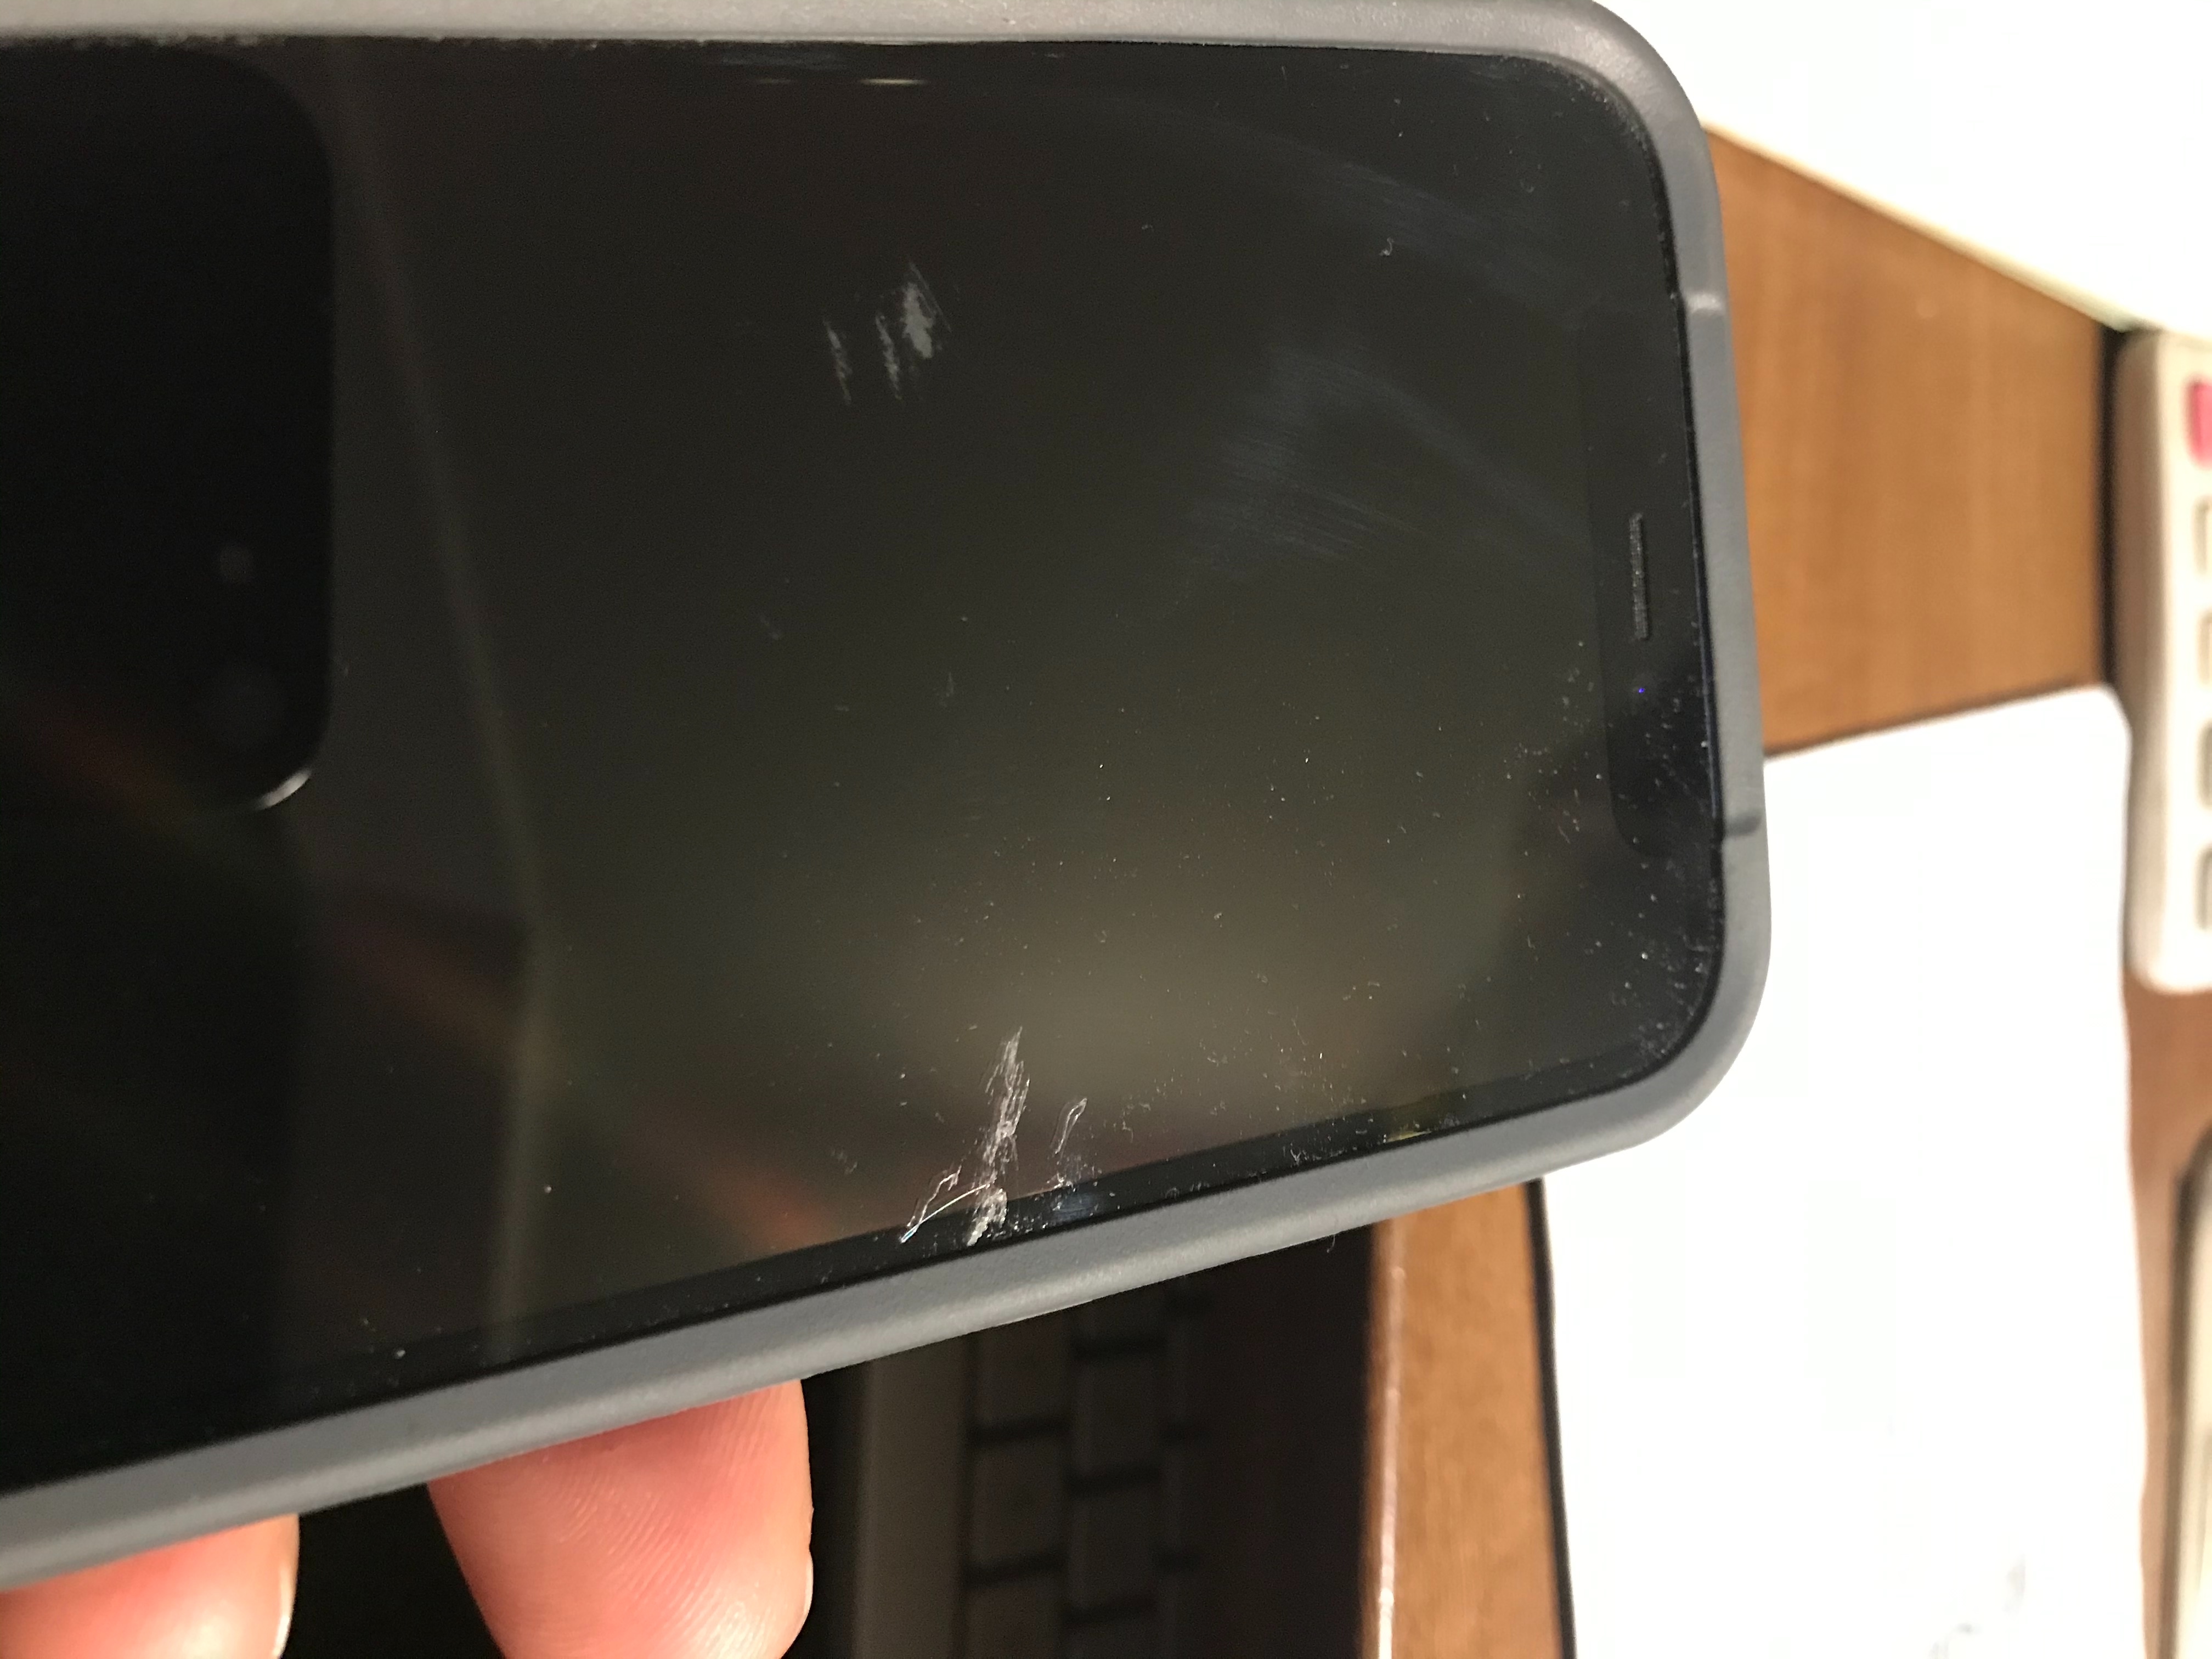 Brand new phone with screen scratch - Apple Community